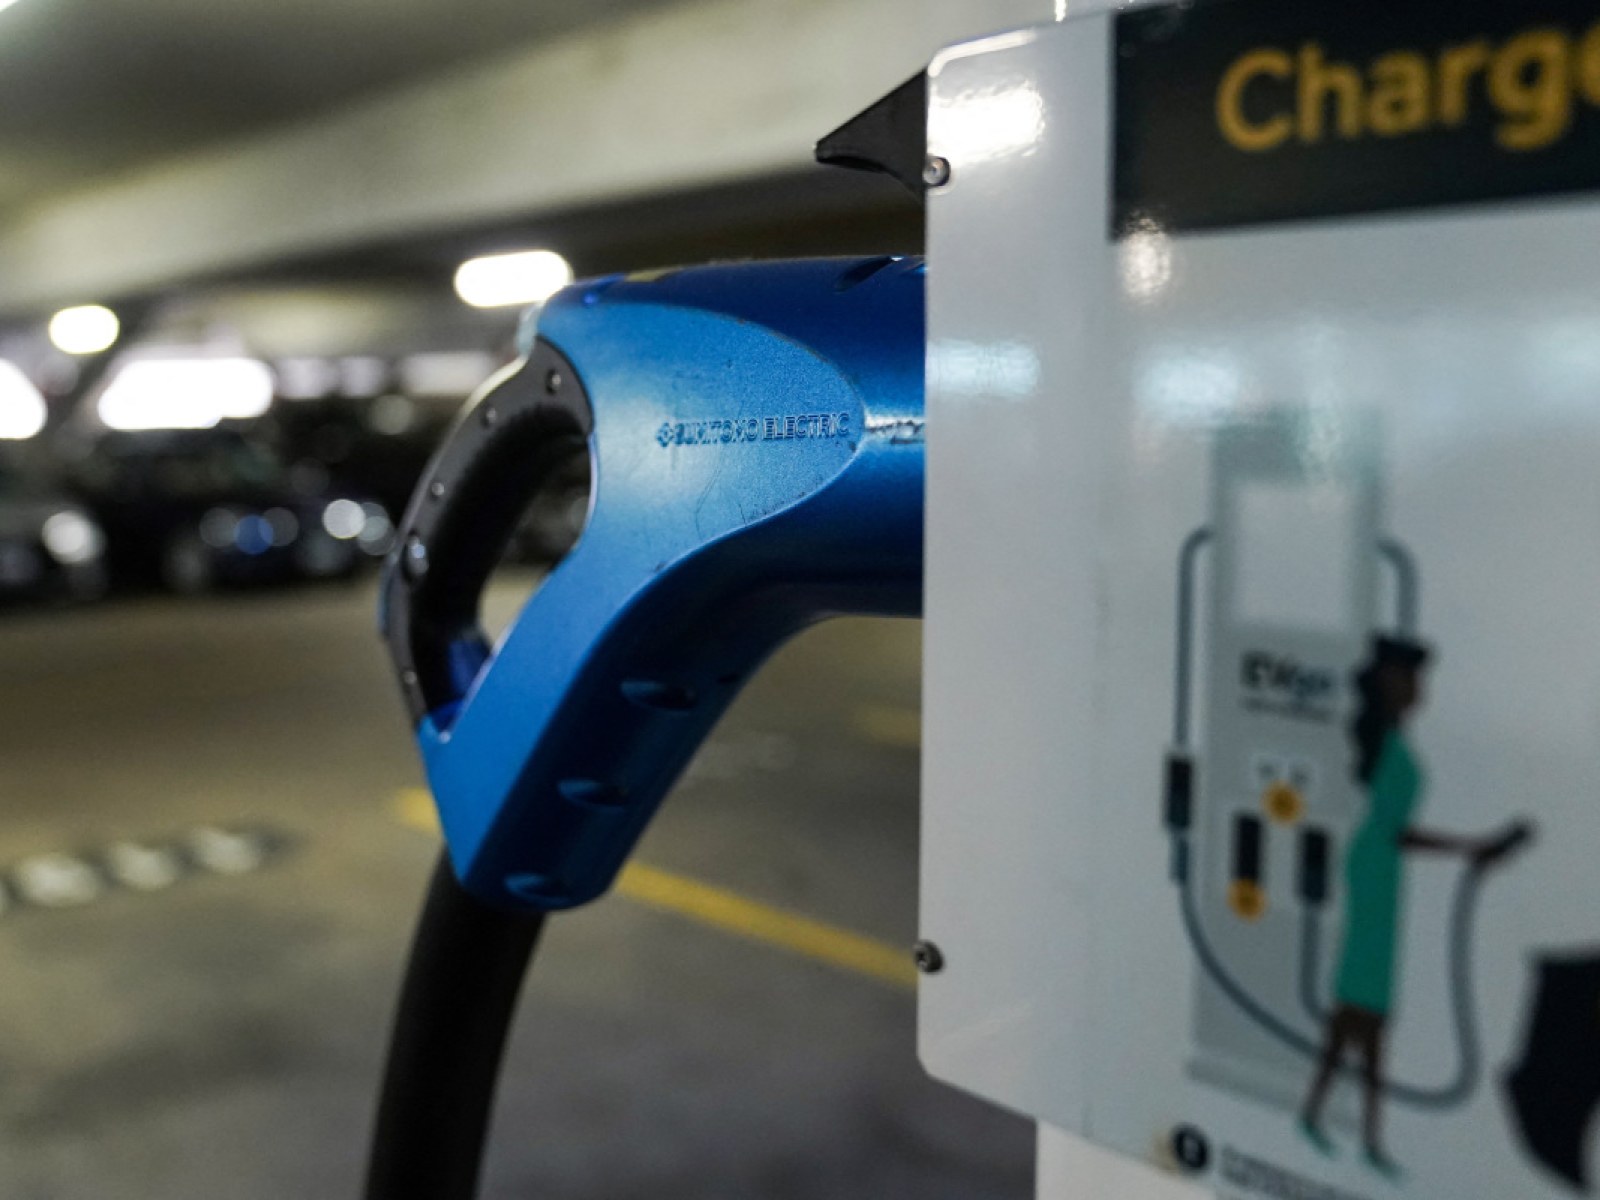 GM to put thousands of electric vehicle chargers in rural America